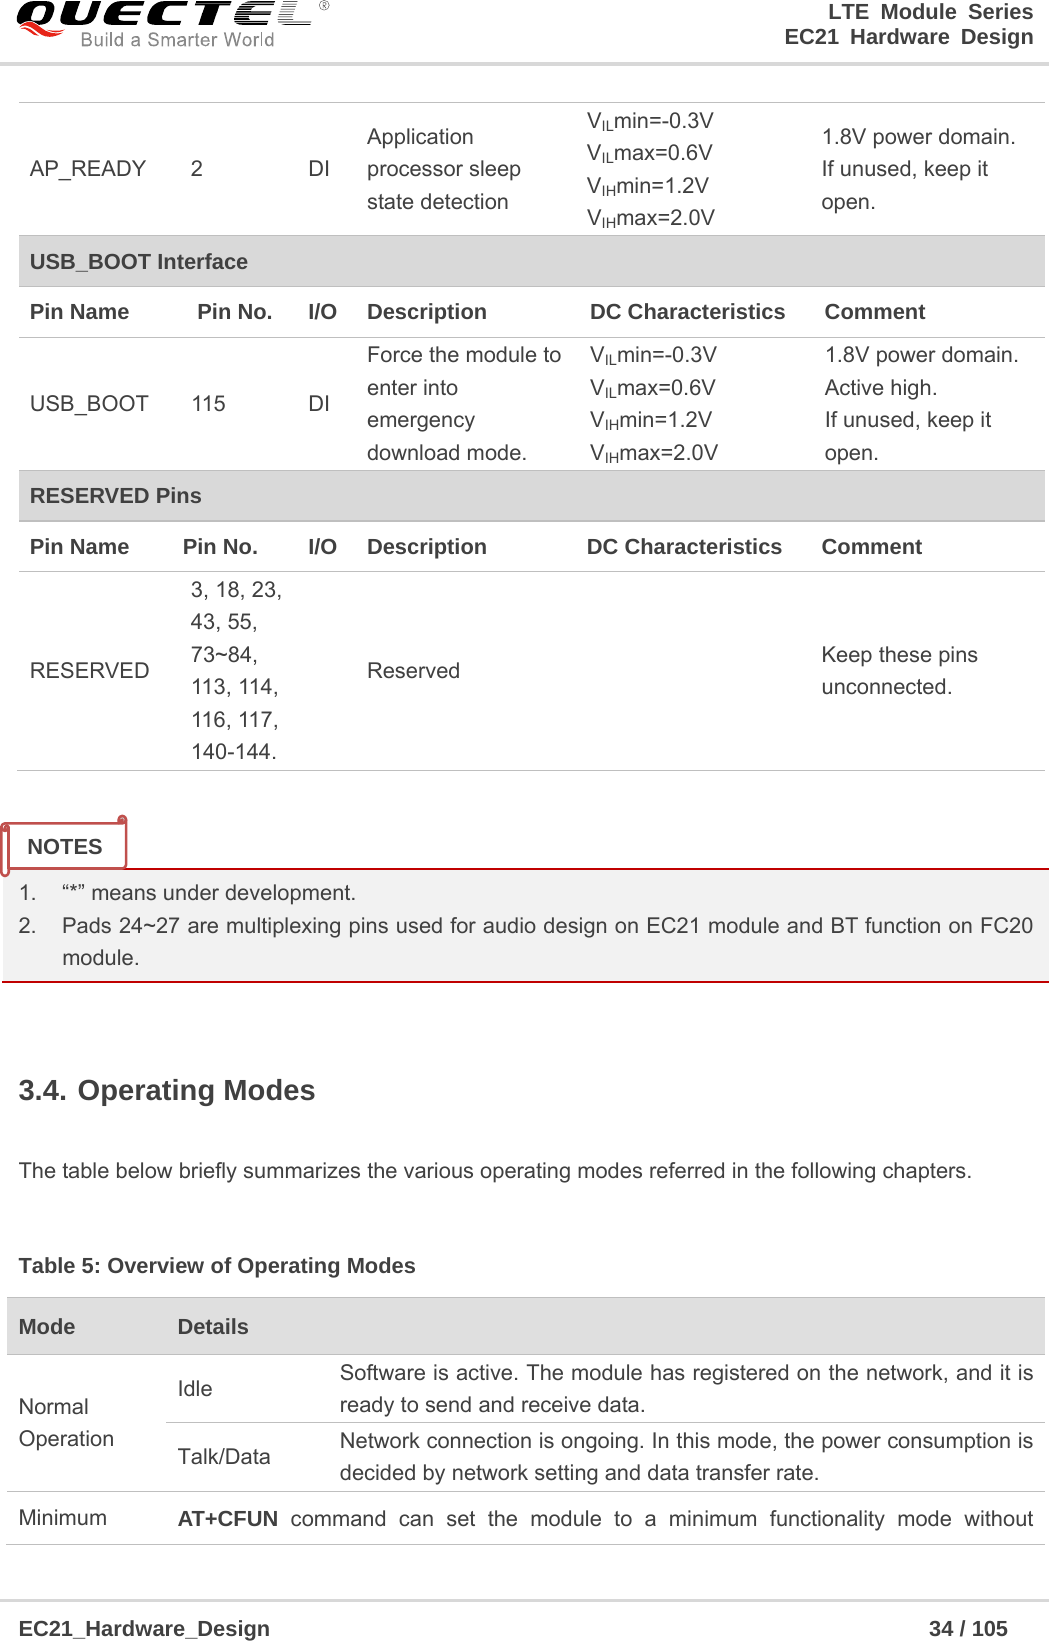                                                                        LTE Module Series                                                                 EC21 Hardware Design  EC21_Hardware_Design                                                            34 / 105      1.  “*” means under development. 2.  Pads 24~27 are multiplexing pins used for audio design on EC21 module and BT function on FC20 module.  3.4. Operating Modes  The table below briefly summarizes the various operating modes referred in the following chapters.  Table 5: Overview of Operating Modes Mode  Details  Normal Operation Idle  Software is active. The module has registered on the network, and it is ready to send and receive data. Talk/Data  Network connection is ongoing. In this mode, the power consumption is decided by network setting and data transfer rate. Minimum  AT+CFUN  command can set the module to a minimum functionality mode without AP_READY 2  DI Application processor sleep state detection VILmin=-0.3V VILmax=0.6V VIHmin=1.2V VIHmax=2.0V 1.8V power domain. If unused, keep it open. USB_BOOT Interface Pin Name    Pin No.  I/O  Description    DC Characteristics    Comment   USB_BOOT 115  DI Force the module to enter into emergency download mode. VILmin=-0.3V VILmax=0.6V VIHmin=1.2V VIHmax=2.0V 1.8V power domain. Active high. If unused, keep it open. RESERVED Pins Pin Name    Pin No.  I/O  Description    DC Characteristics    Comment   RESERVED 3, 18, 23, 43, 55, 73~84, 113, 114, 116, 117,140-144.  Reserved   Keep these pins unconnected. NOTES 